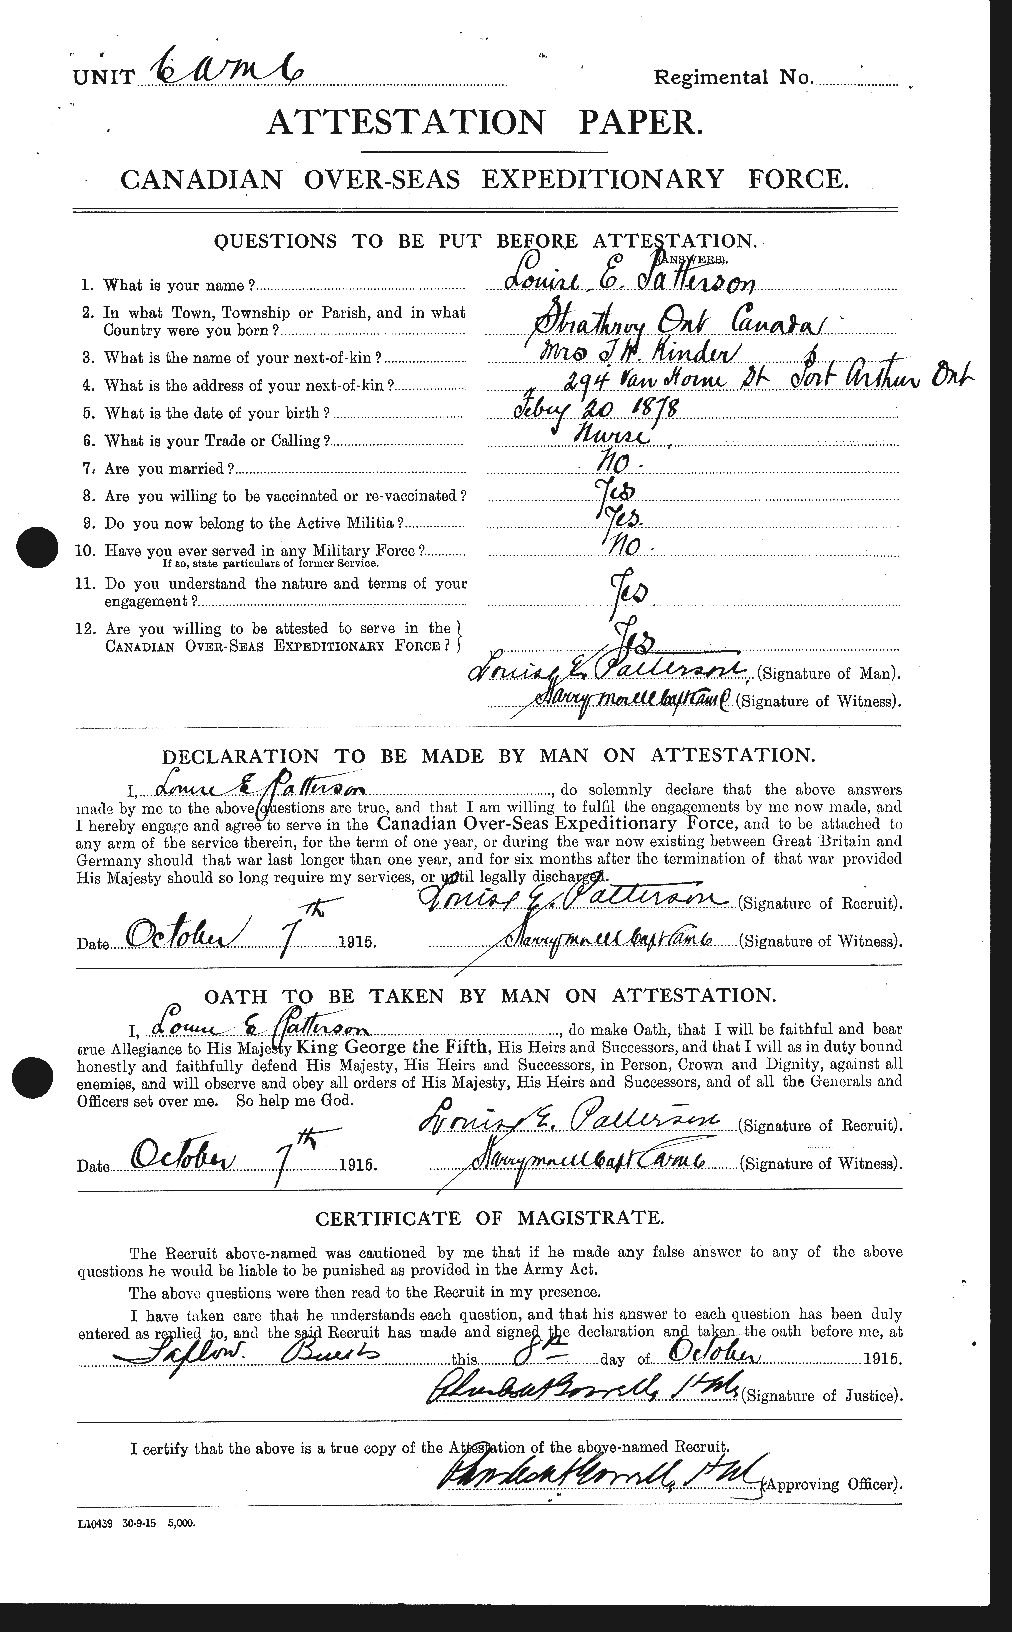 Personnel Records of the First World War - CEF 568654a